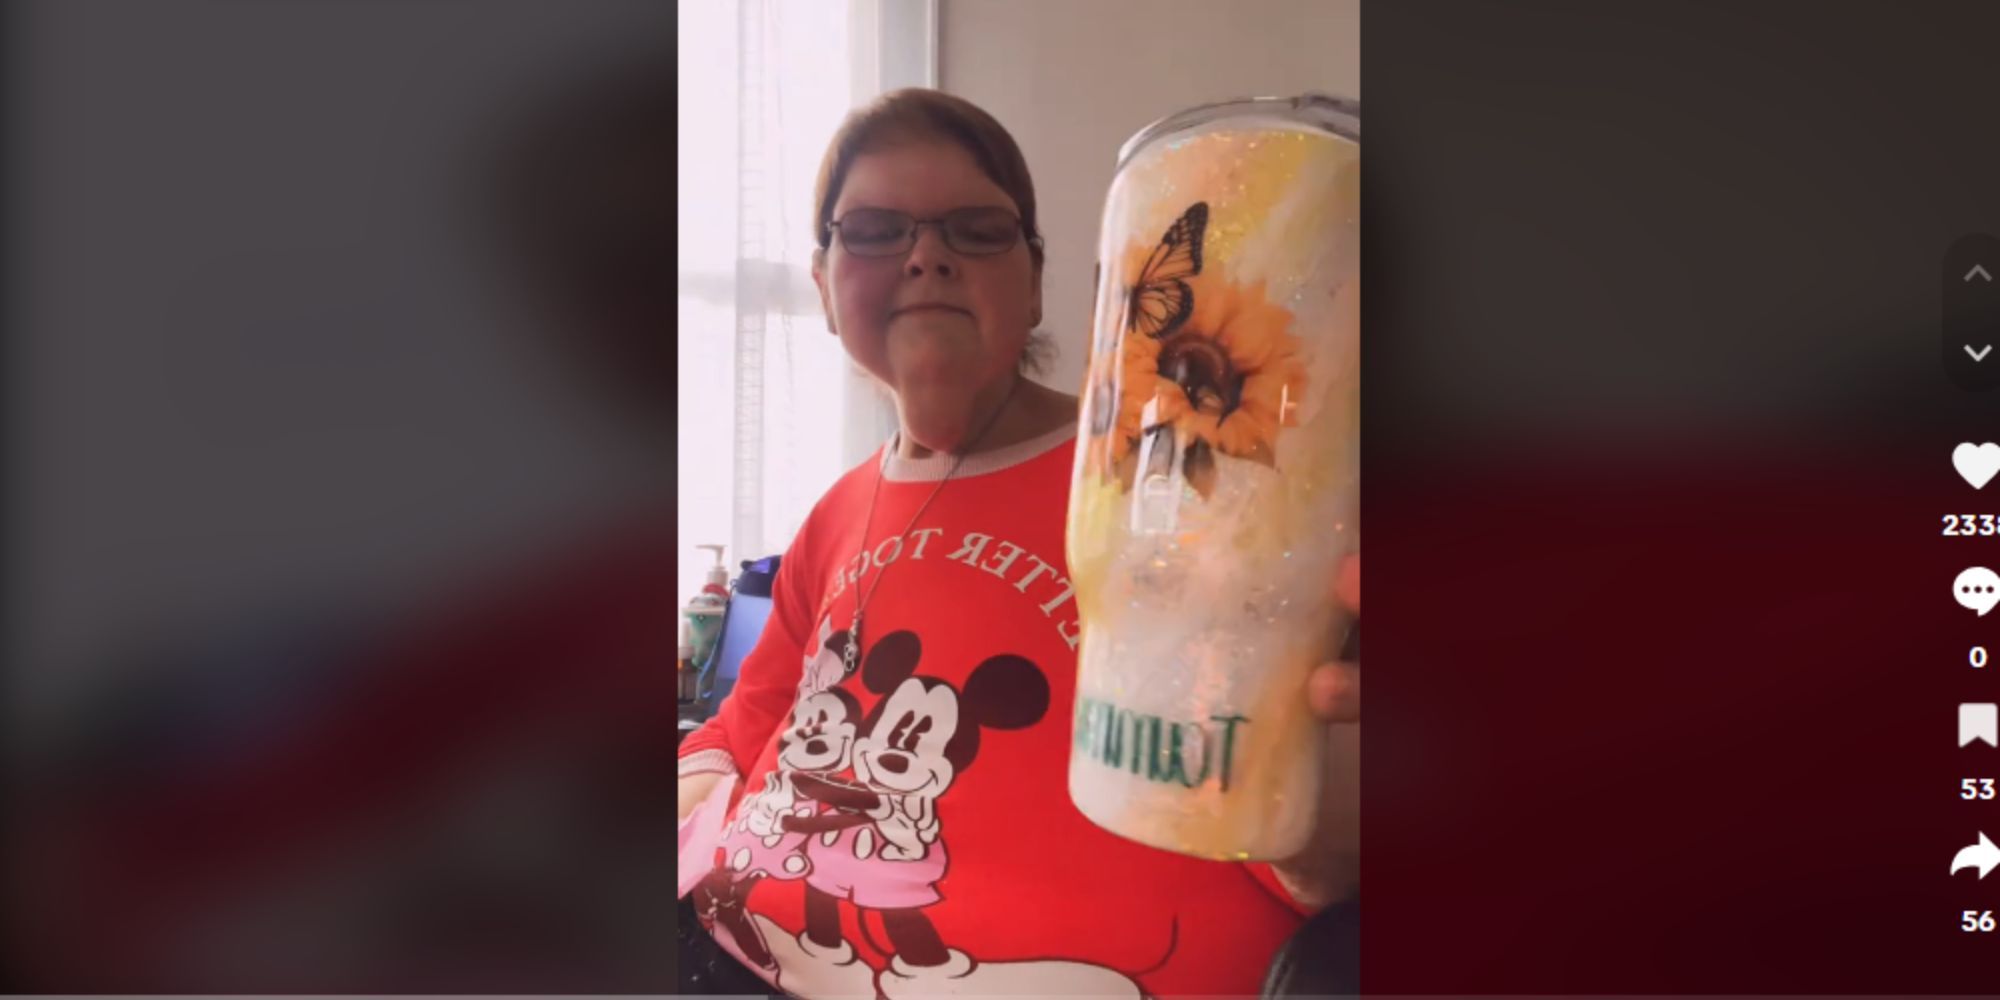 1000-lb Sisters Tammy Slaton unboxing a tumbler, wearing a red Disney graphic tee shirt